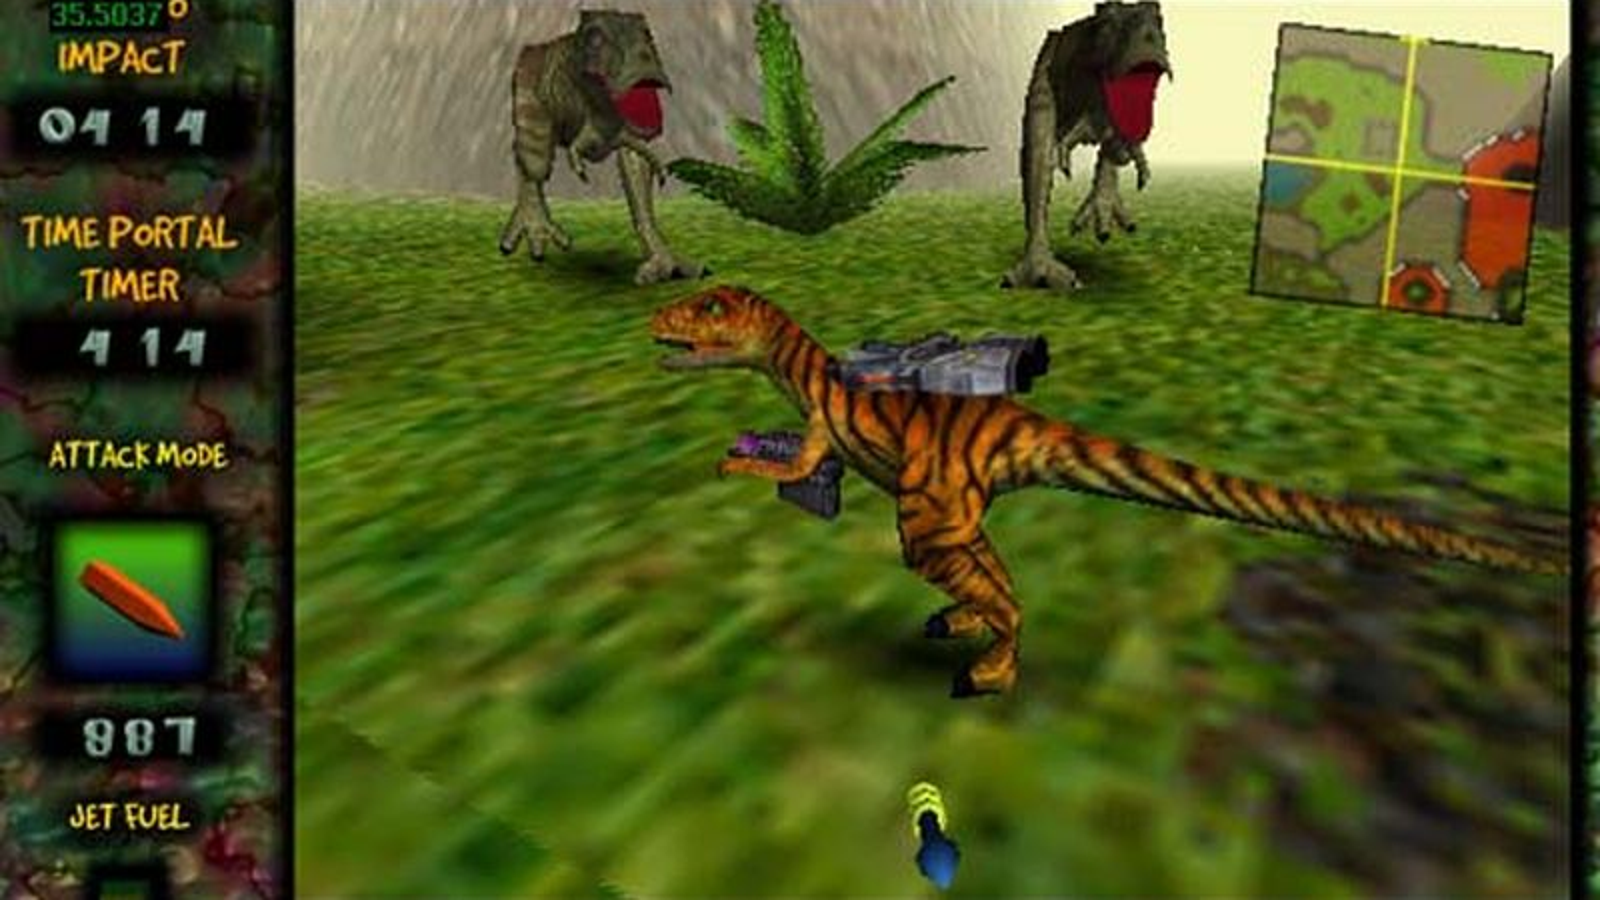 Remembering old games on Mac is like visiting a lost world